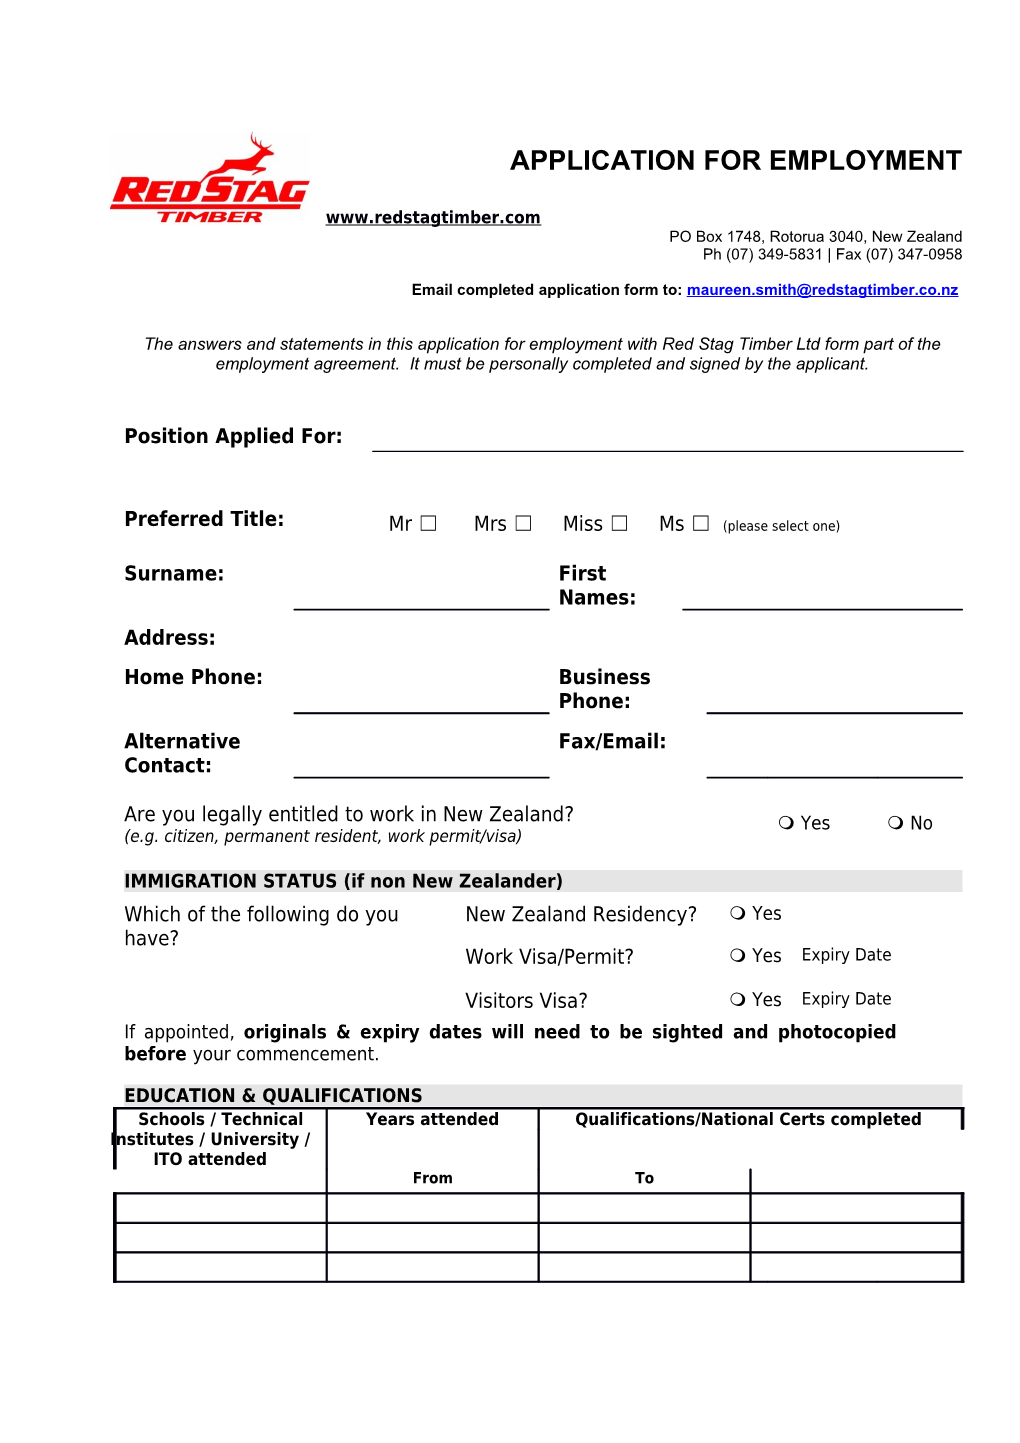 Email Completed Application Form To